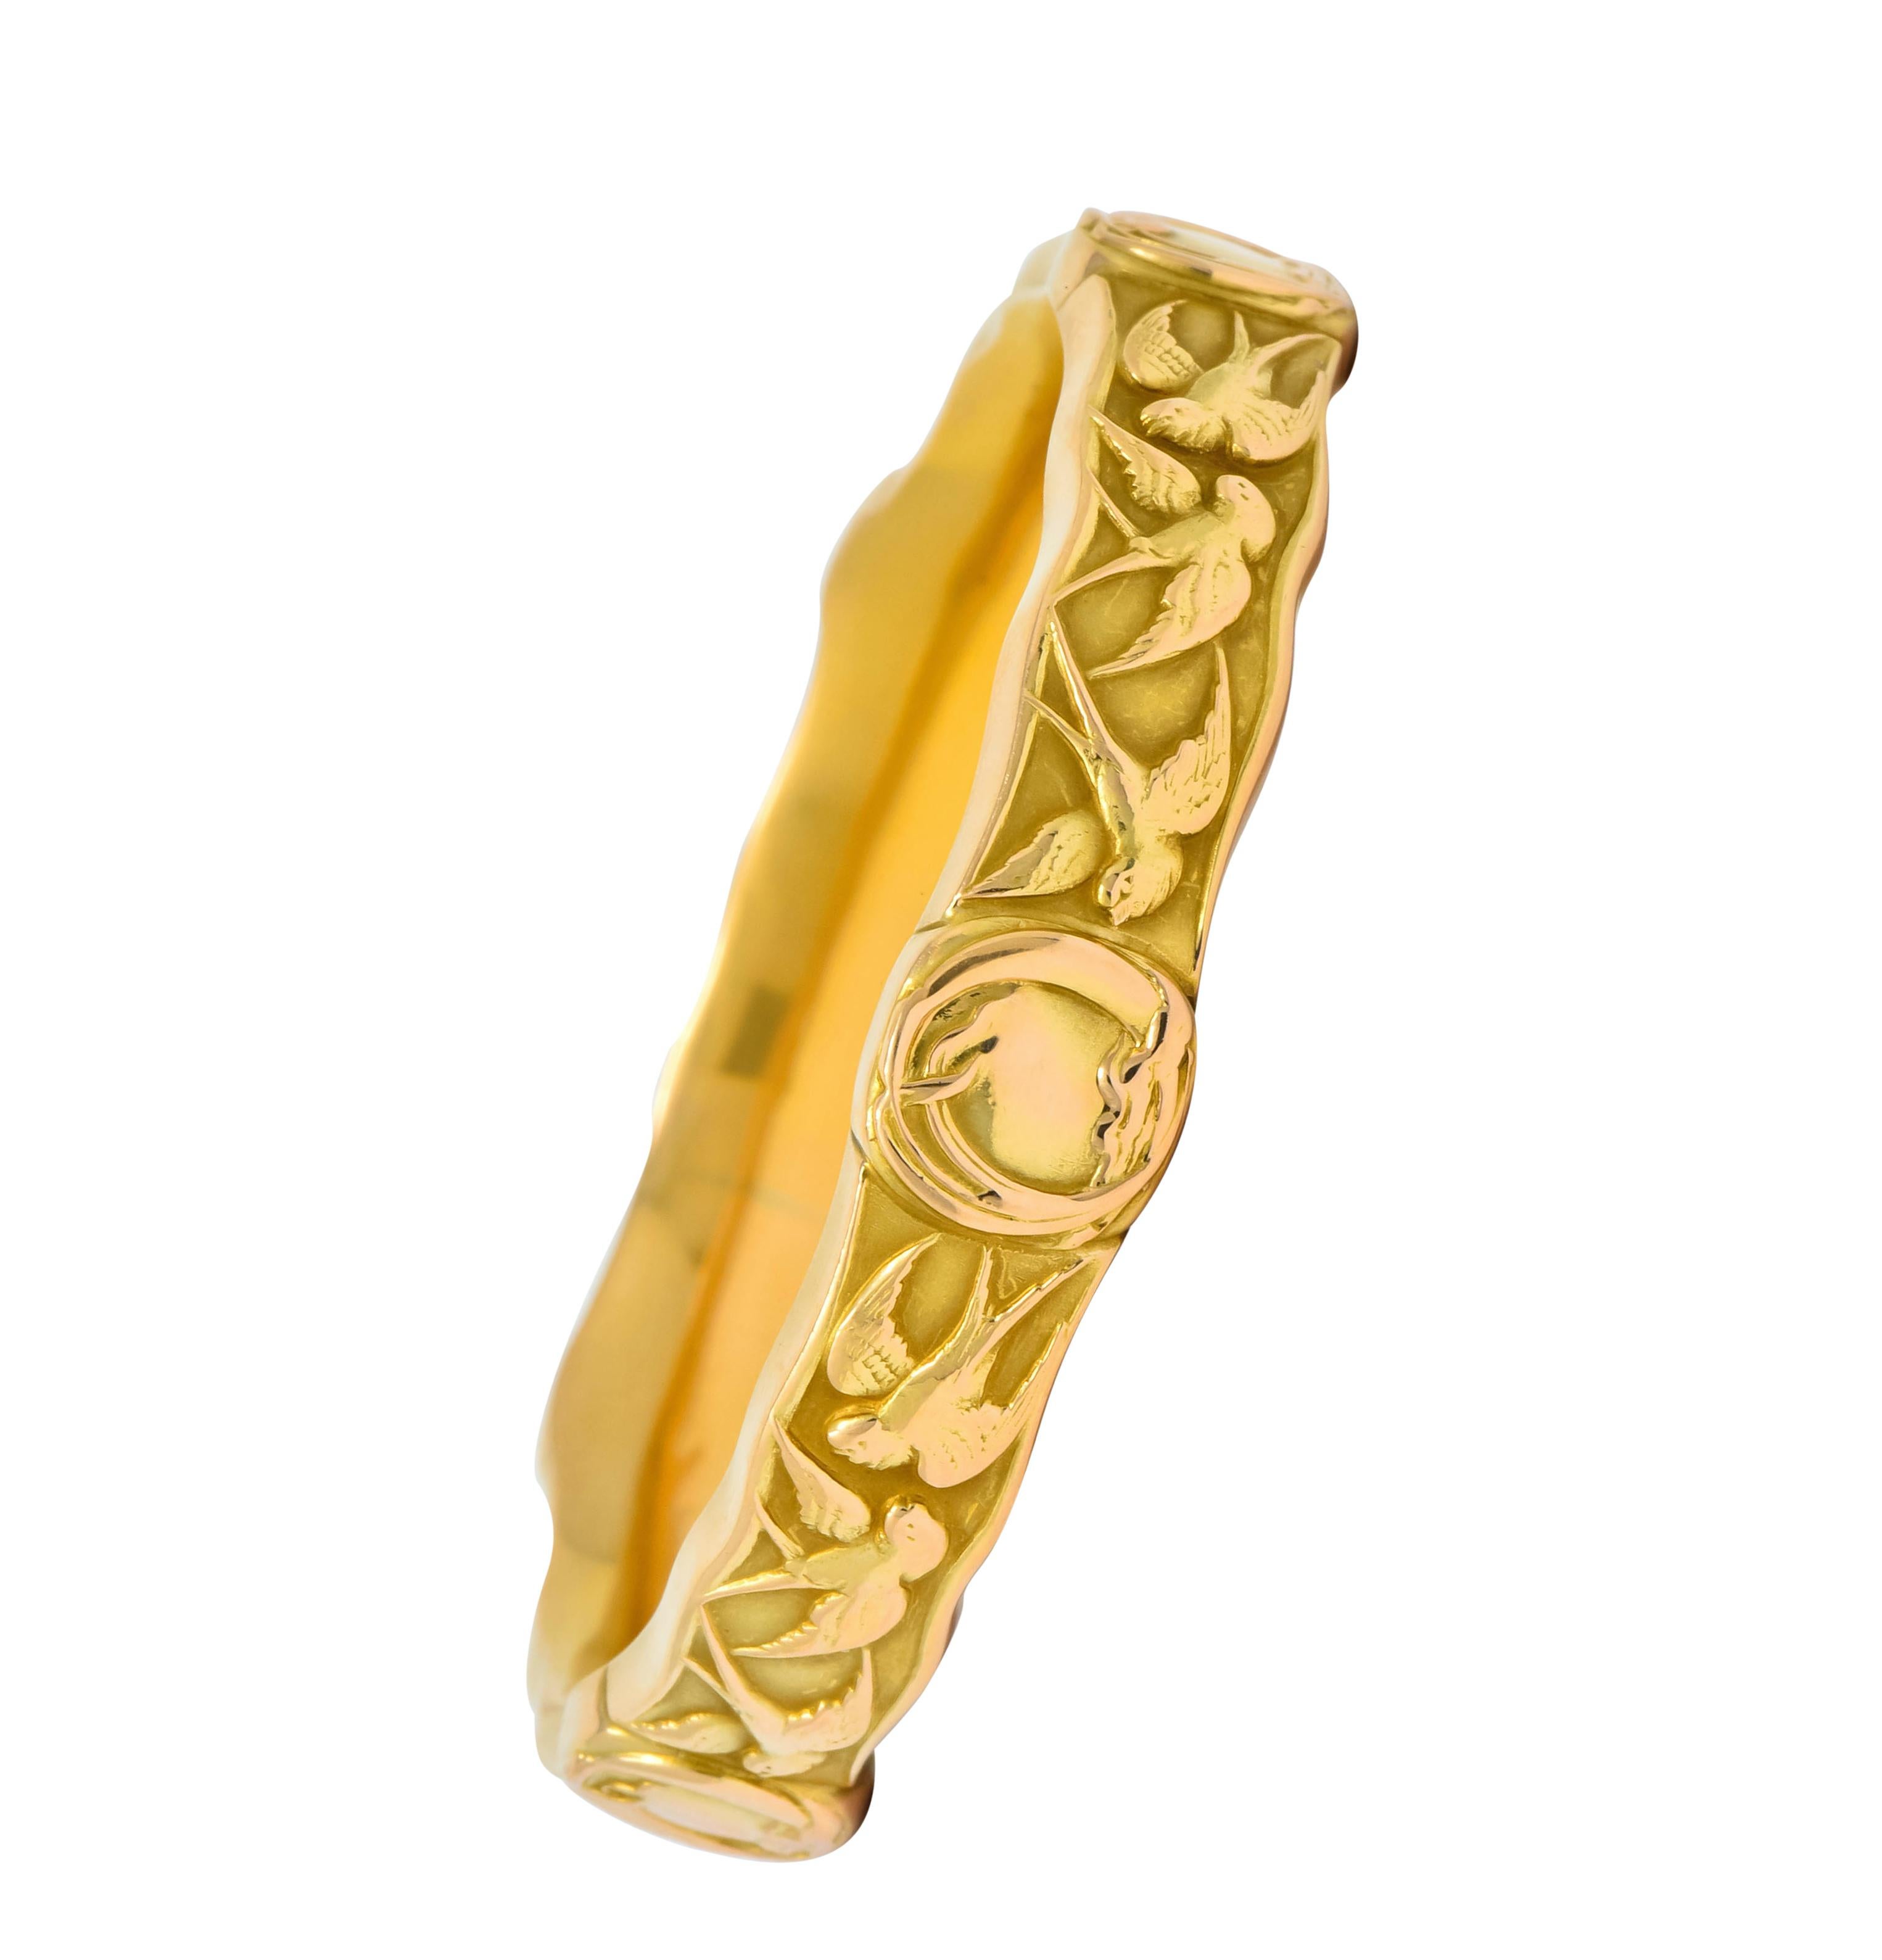 Designed as a wavy edged bangle bracelet decorated by swallow motif in three different patterns of flight

Accented by five oval stations with stylized ribbon borders

With maker’s mark for Riker Brothers and stamped 14k for 14 karat gold

Circa